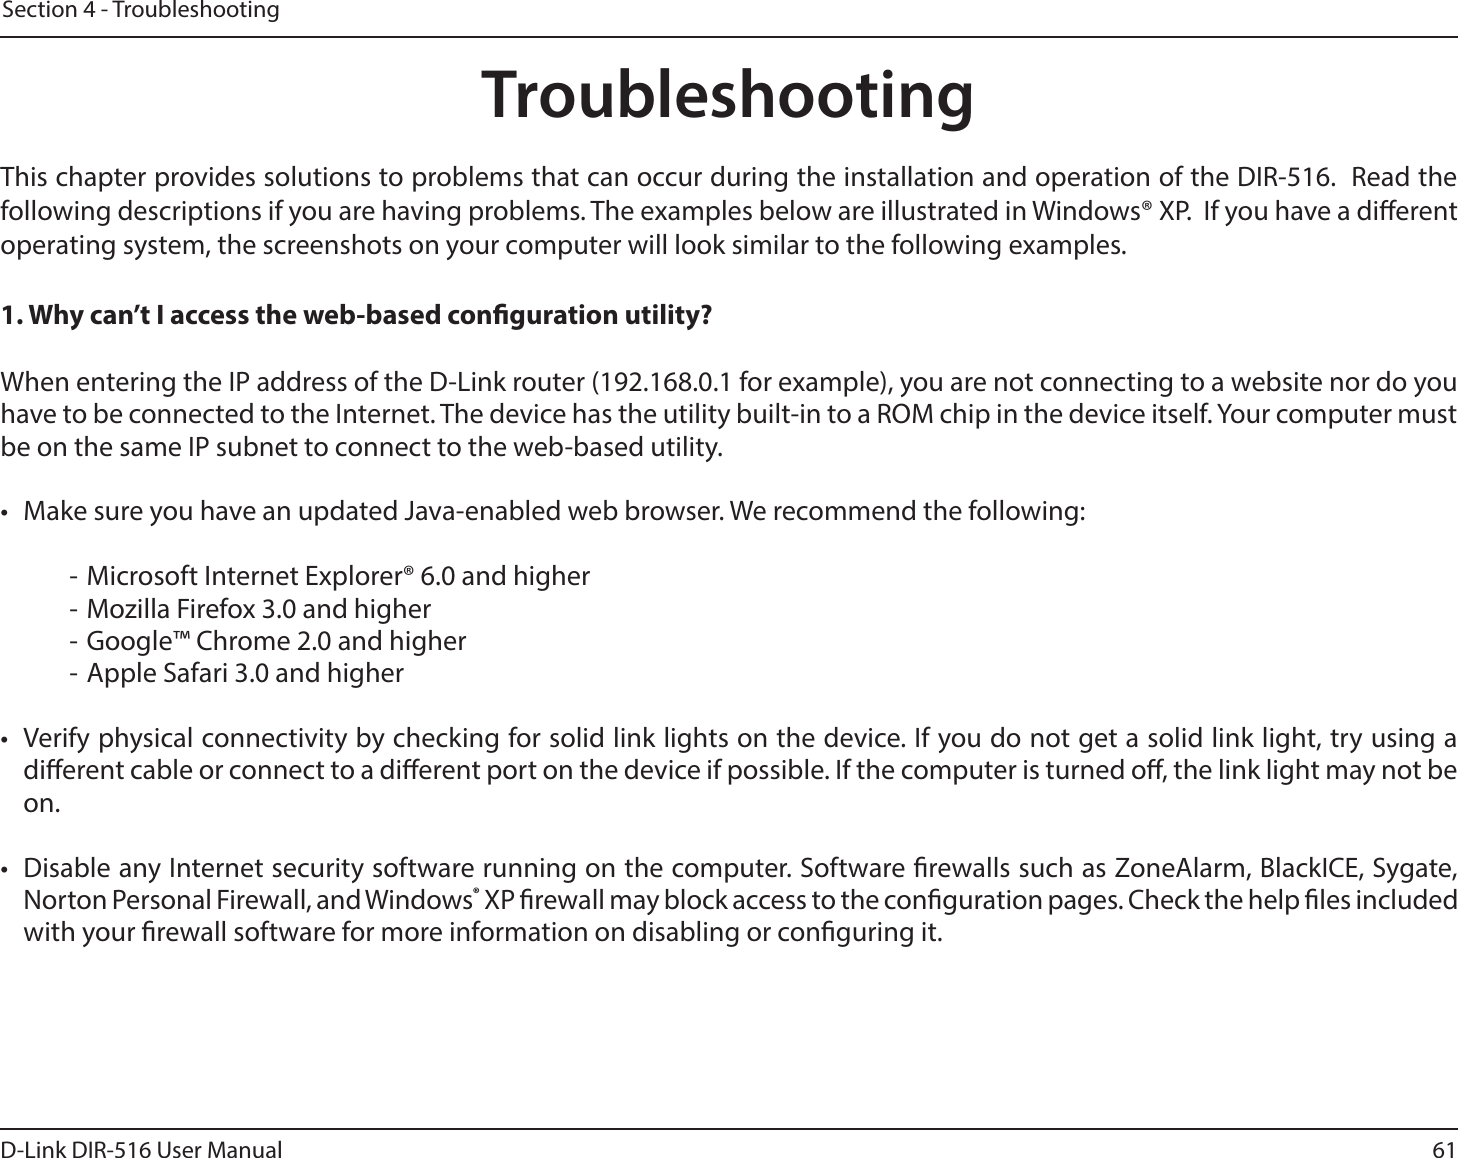 61D-Link DIR-516 User ManualSection 4 - TroubleshootingTroubleshootingThis chapter provides solutions to problems that can occur during the installation and operation of the DIR-516.  Read the following descriptions if you are having problems. The examples below are illustrated in Windows® XP.  If you have a dierent operating system, the screenshots on your computer will look similar to the following examples.1. Why can’t I access the web-based conguration utility?When entering the IP address of the D-Link router (192.168.0.1 for example), you are not connecting to a website nor do you have to be connected to the Internet. The device has the utility built-in to a ROM chip in the device itself. Your computer must be on the same IP subnet to connect to the web-based utility. •  Make sure you have an updated Java-enabled web browser. We recommend the following:  - Microsoft Internet Explorer® 6.0 and higher- Mozilla Firefox 3.0 and higher- Google™ Chrome 2.0 and higher- Apple Safari 3.0 and higher•  Verify physical connectivity by checking for solid link lights on the device. If you do not get a solid link light, try using a dierent cable or connect to a dierent port on the device if possible. If the computer is turned o, the link light may not be on.•  Disable any Internet security software running on the computer. Software rewalls such as ZoneAlarm, BlackICE, Sygate, Norton Personal Firewall, and Windows® XP rewall may block access to the conguration pages. Check the help les included with your rewall software for more information on disabling or conguring it.